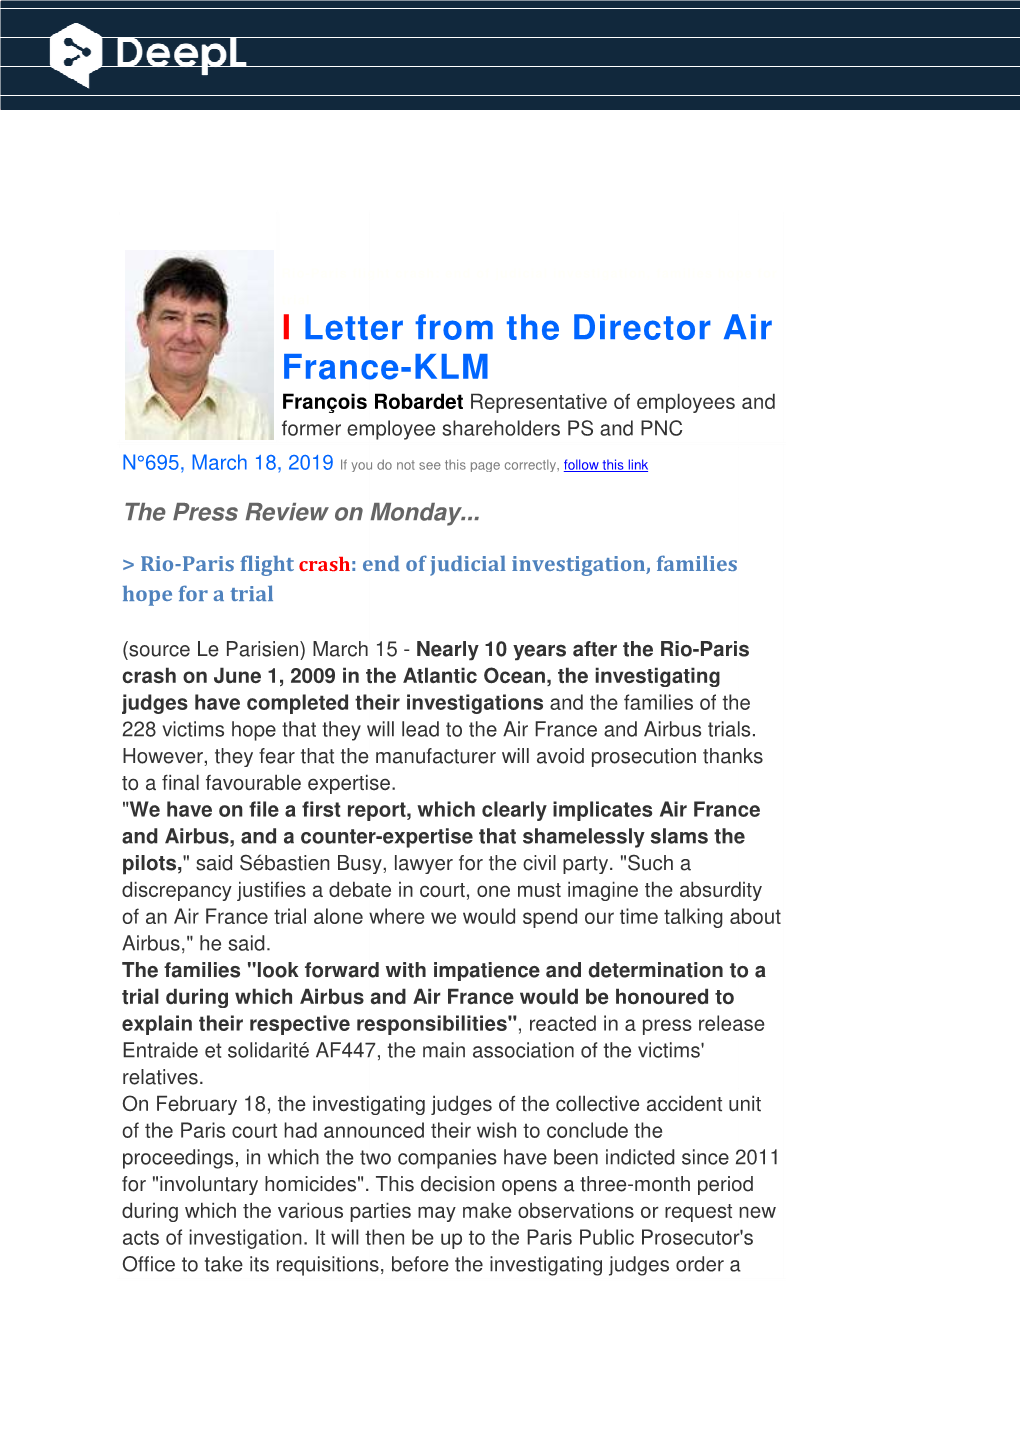 I Letter from the France Letter from the Director Air France-KLM Director